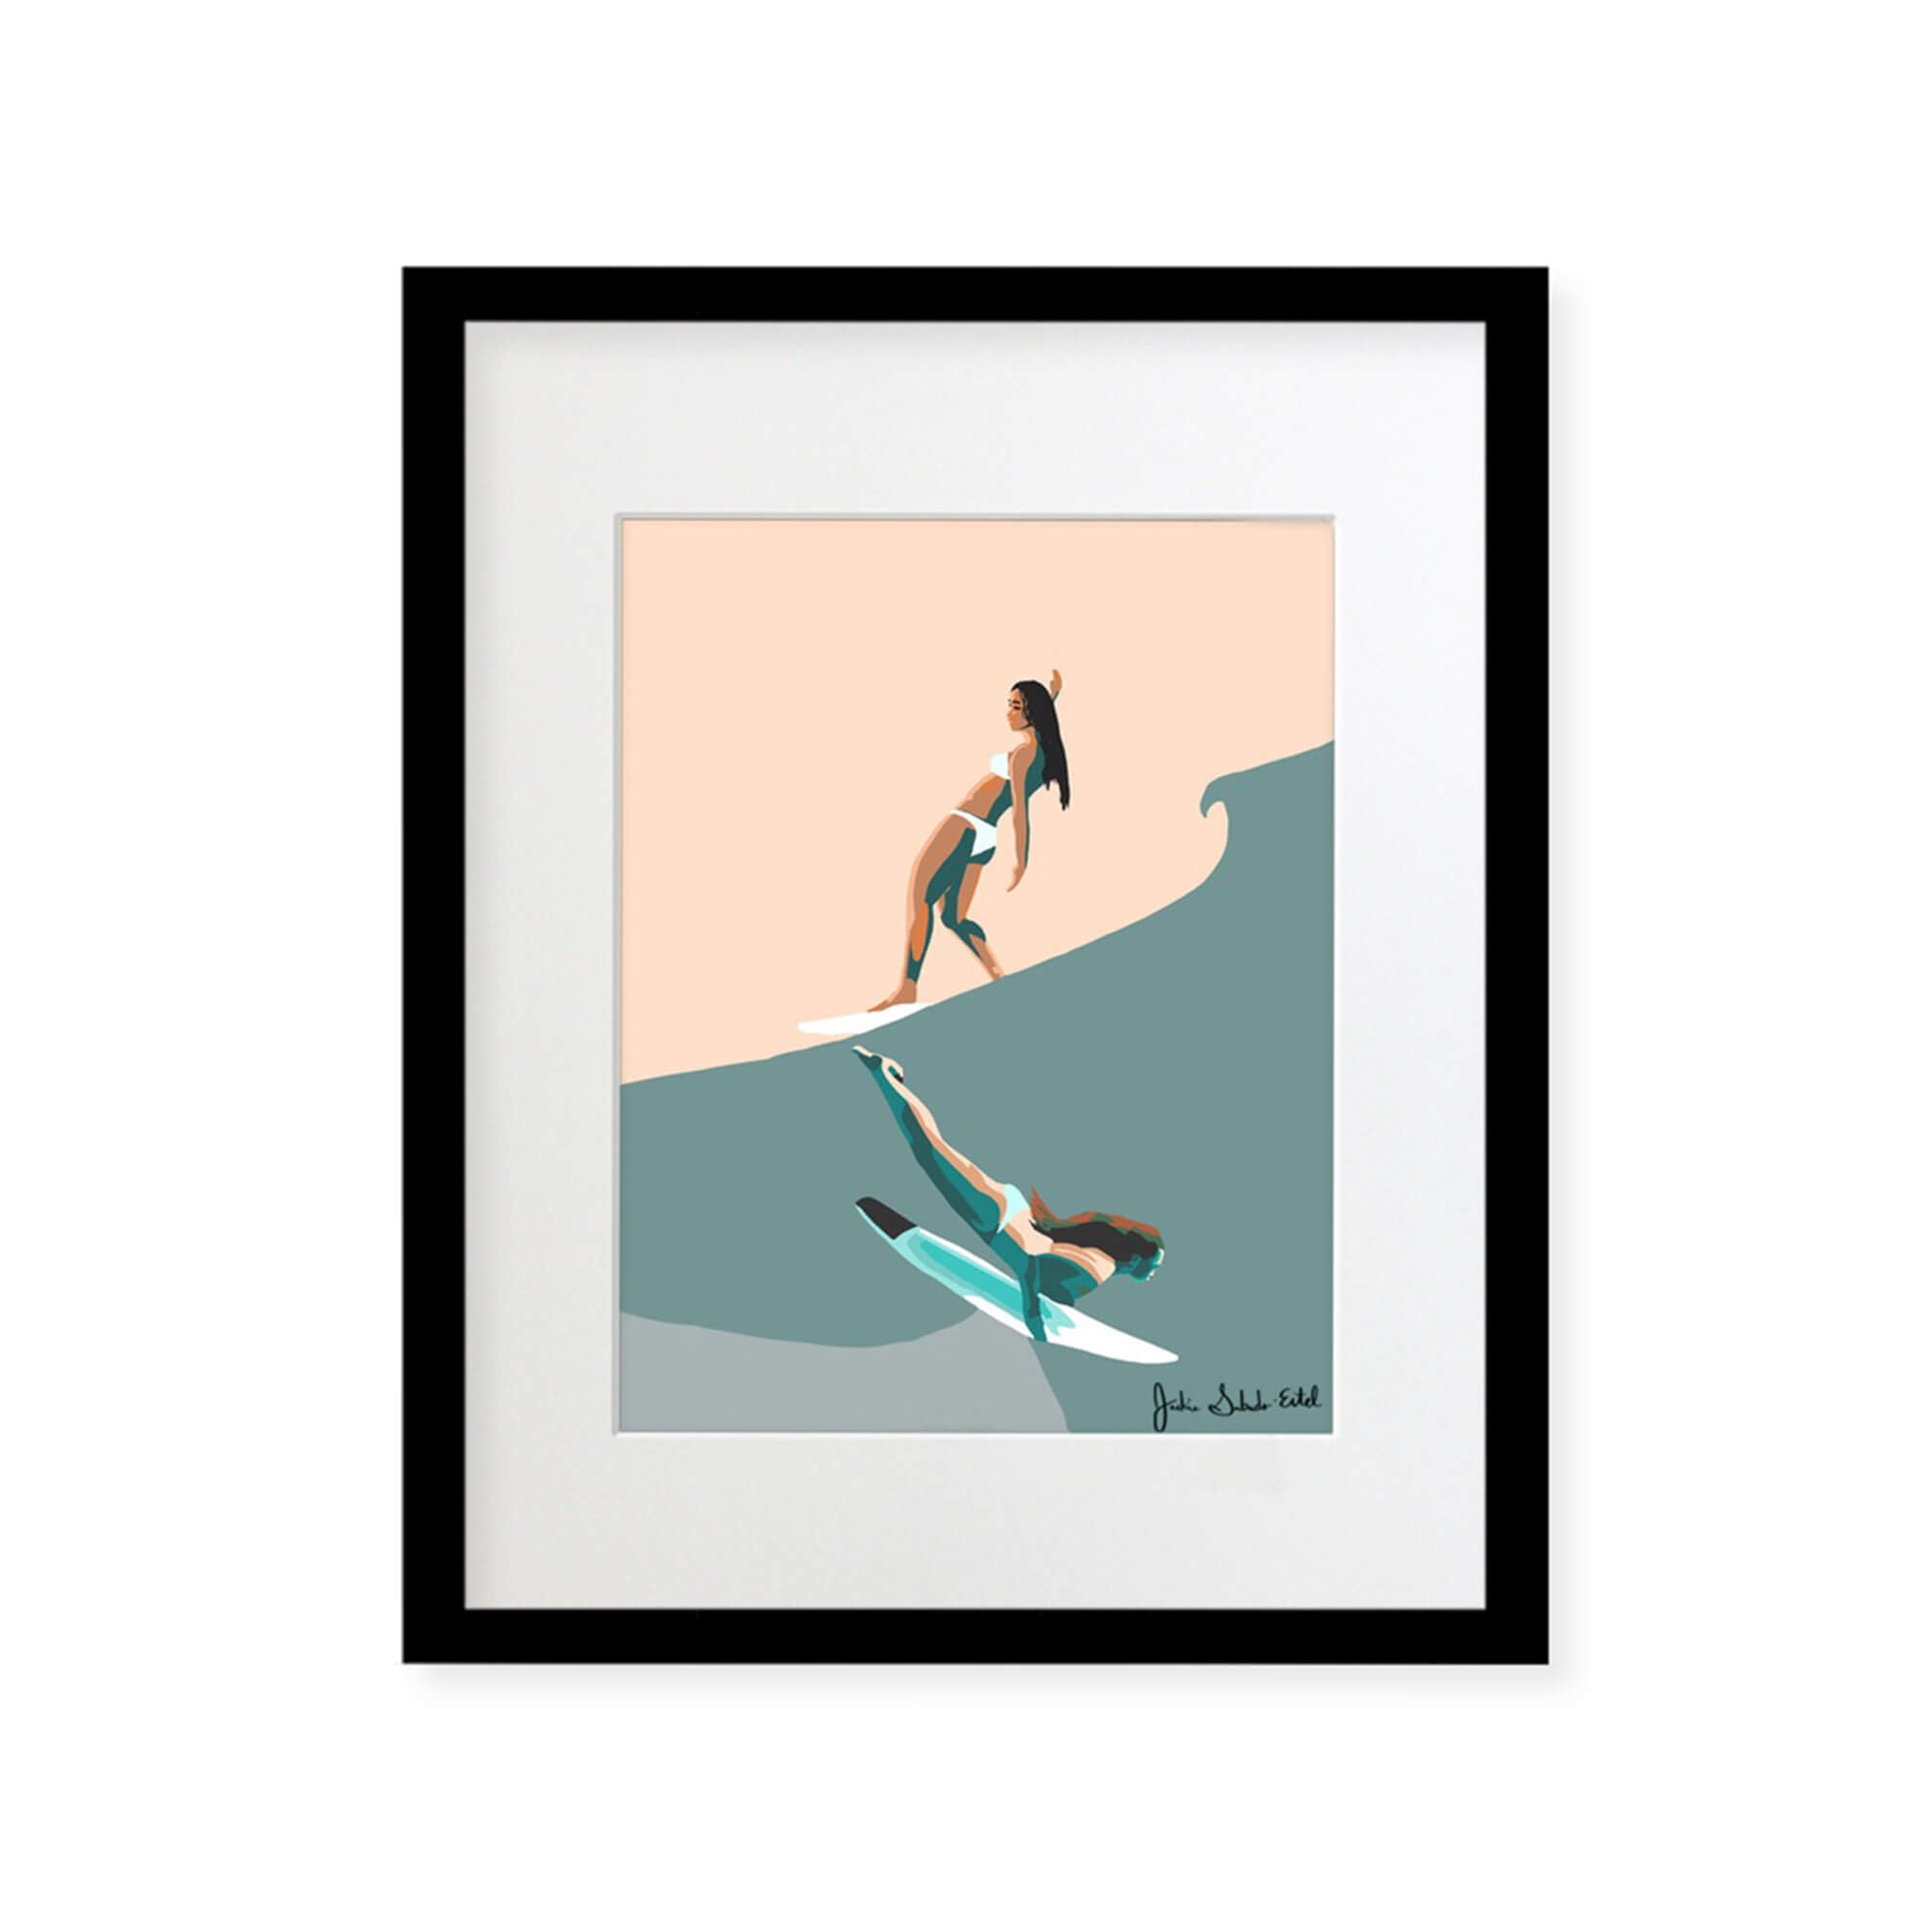 A framed matted art print featuring two female surfers, one riding the waves and the other just right beneath by Hawaii artist Jackie Eitel